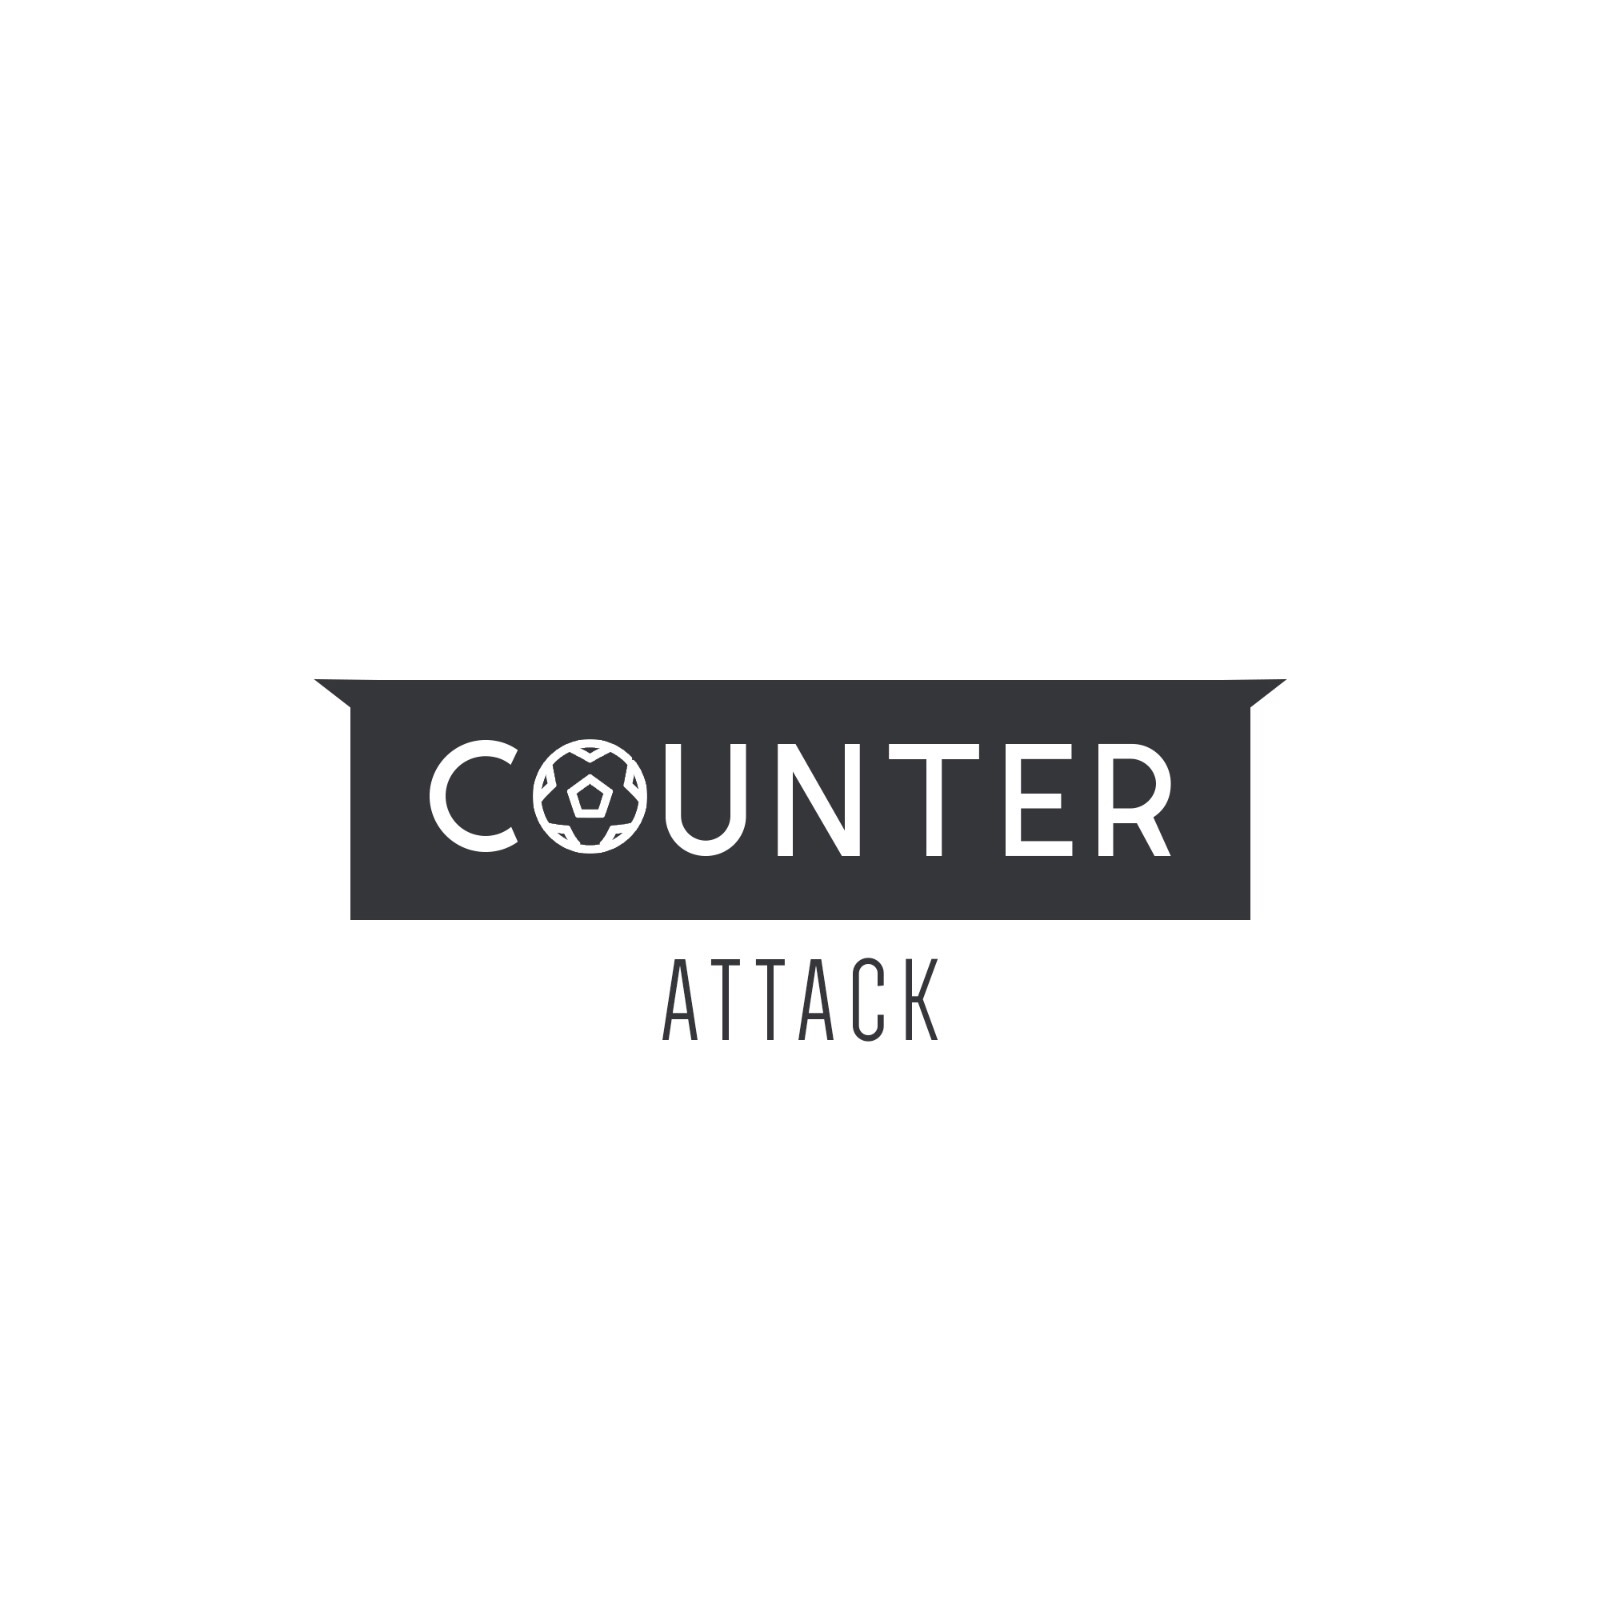 Counter Attack - Episode 56 - Champions League Excitement